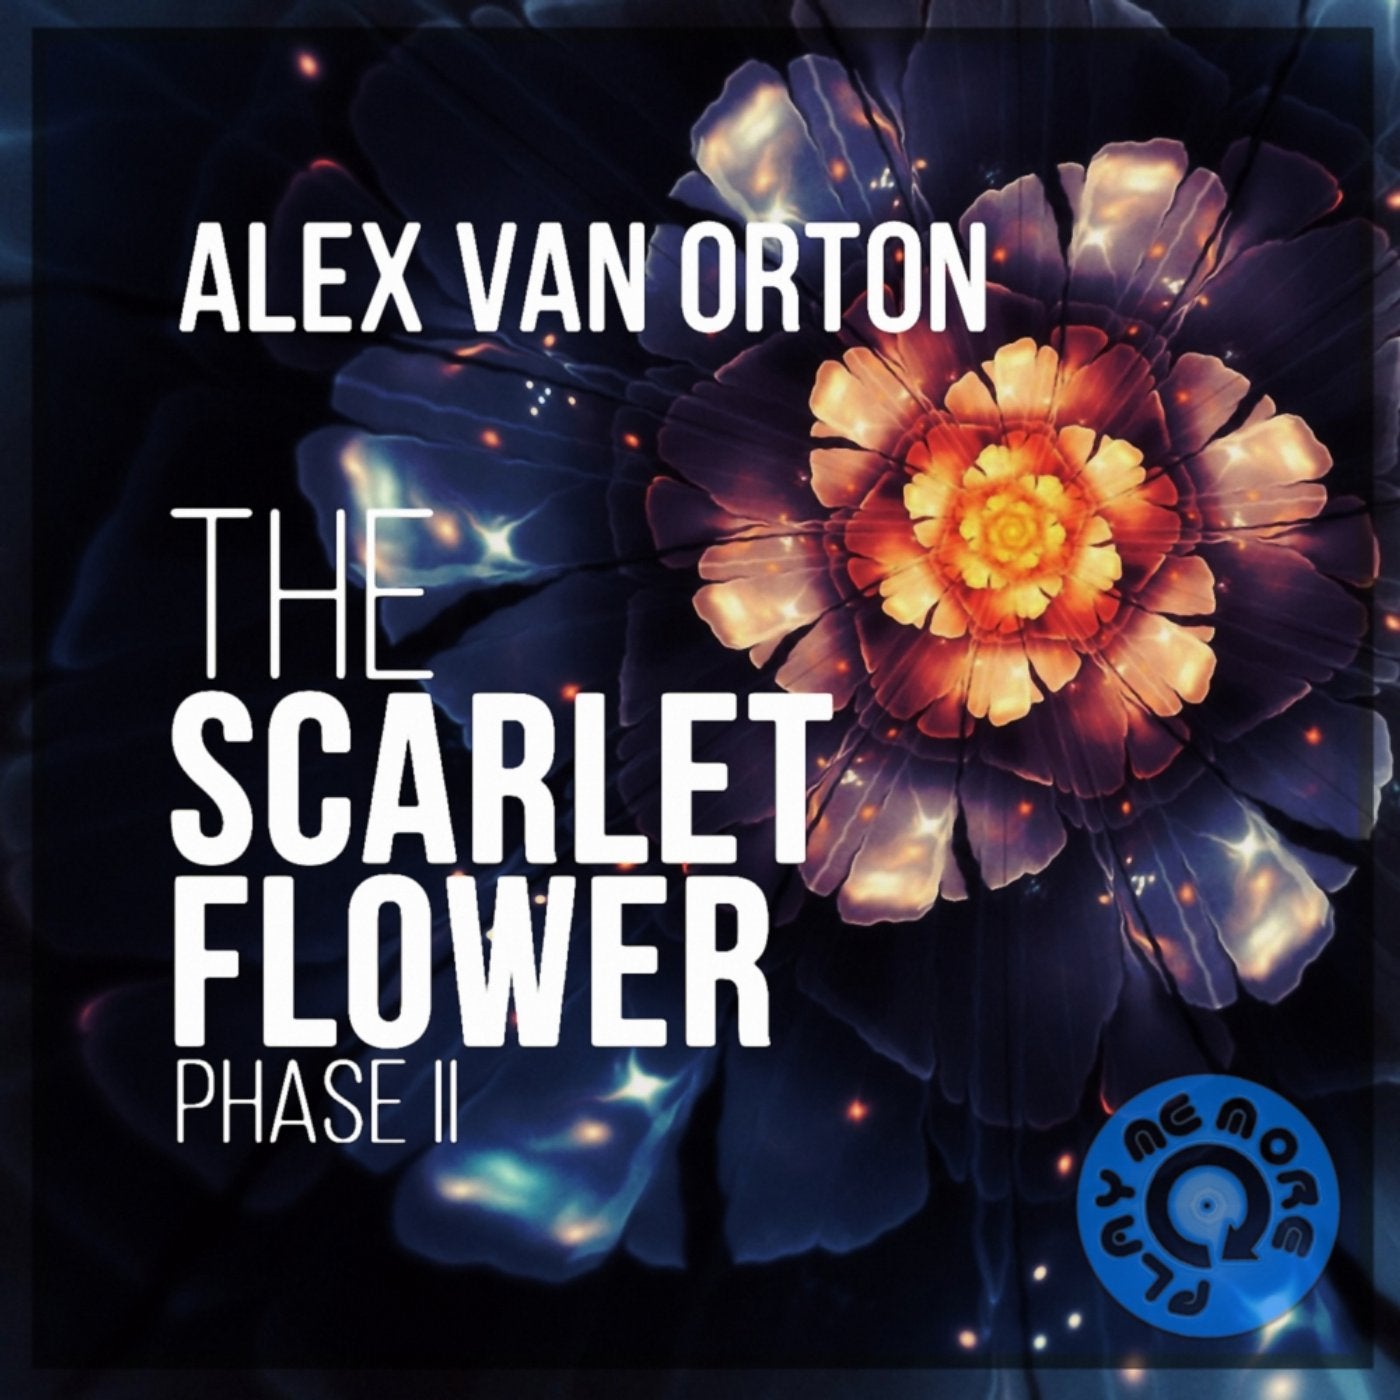 The Scarlet Flower (Phase II)